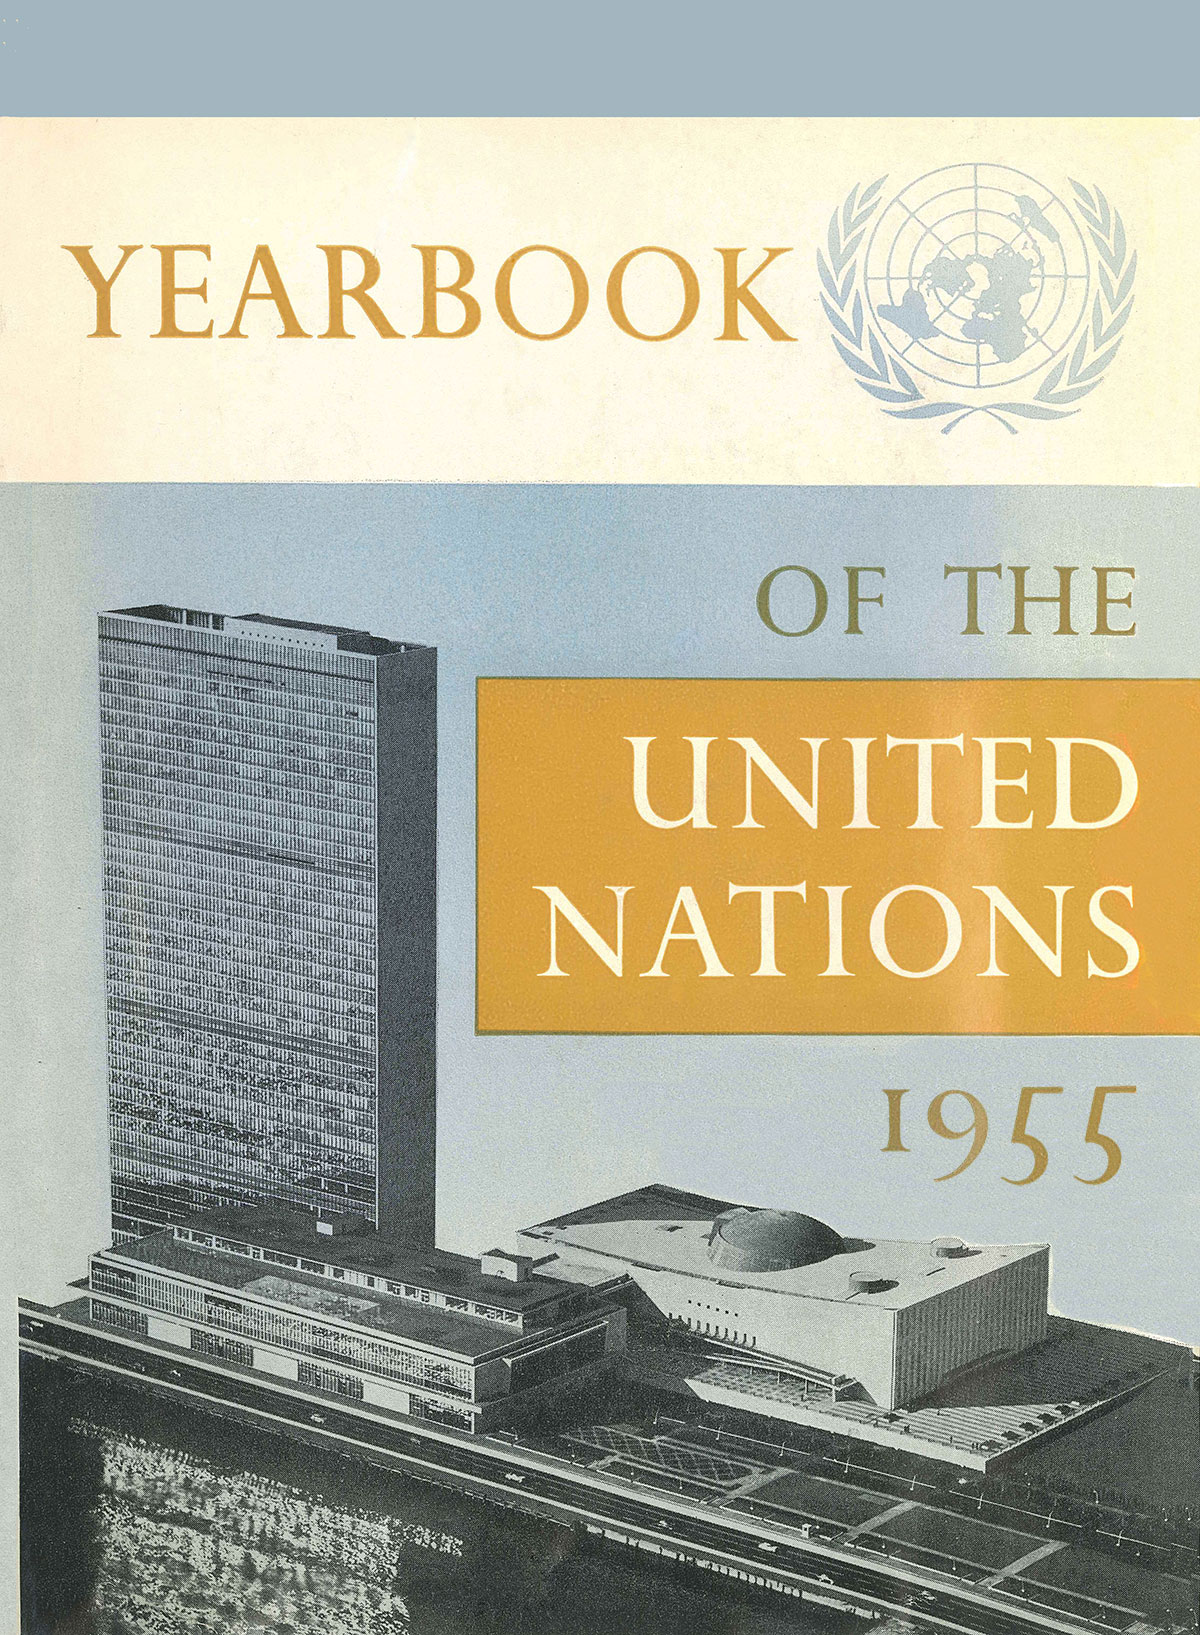 image of Yearbook of the United Nations 1955